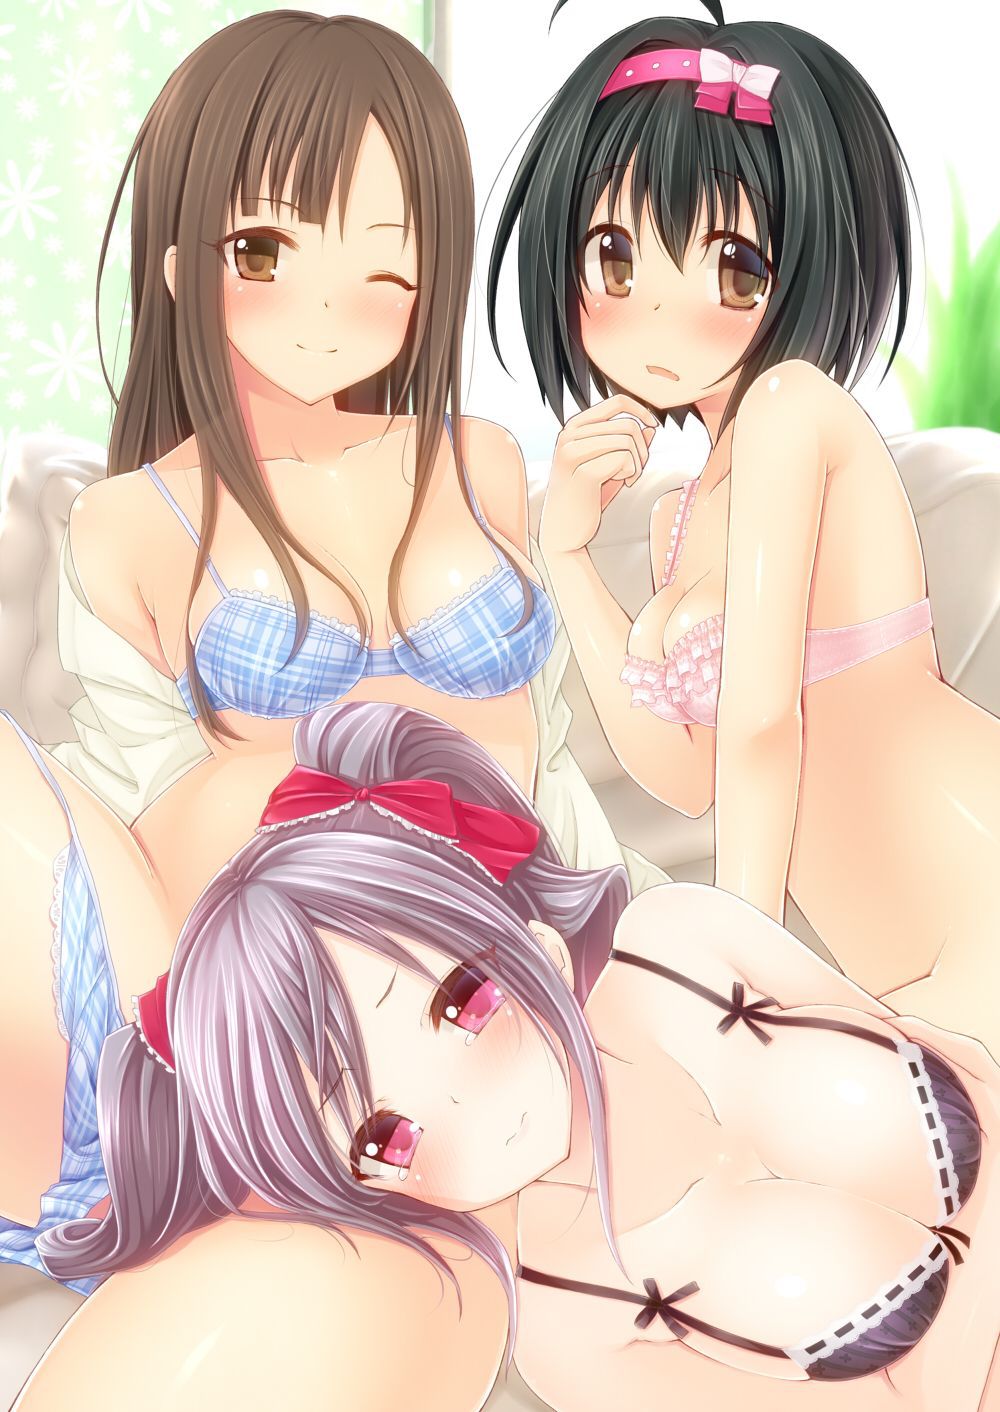 【Secondary erotica】 No matter how many chinpo there are, there is a missing harem erotic image here 3